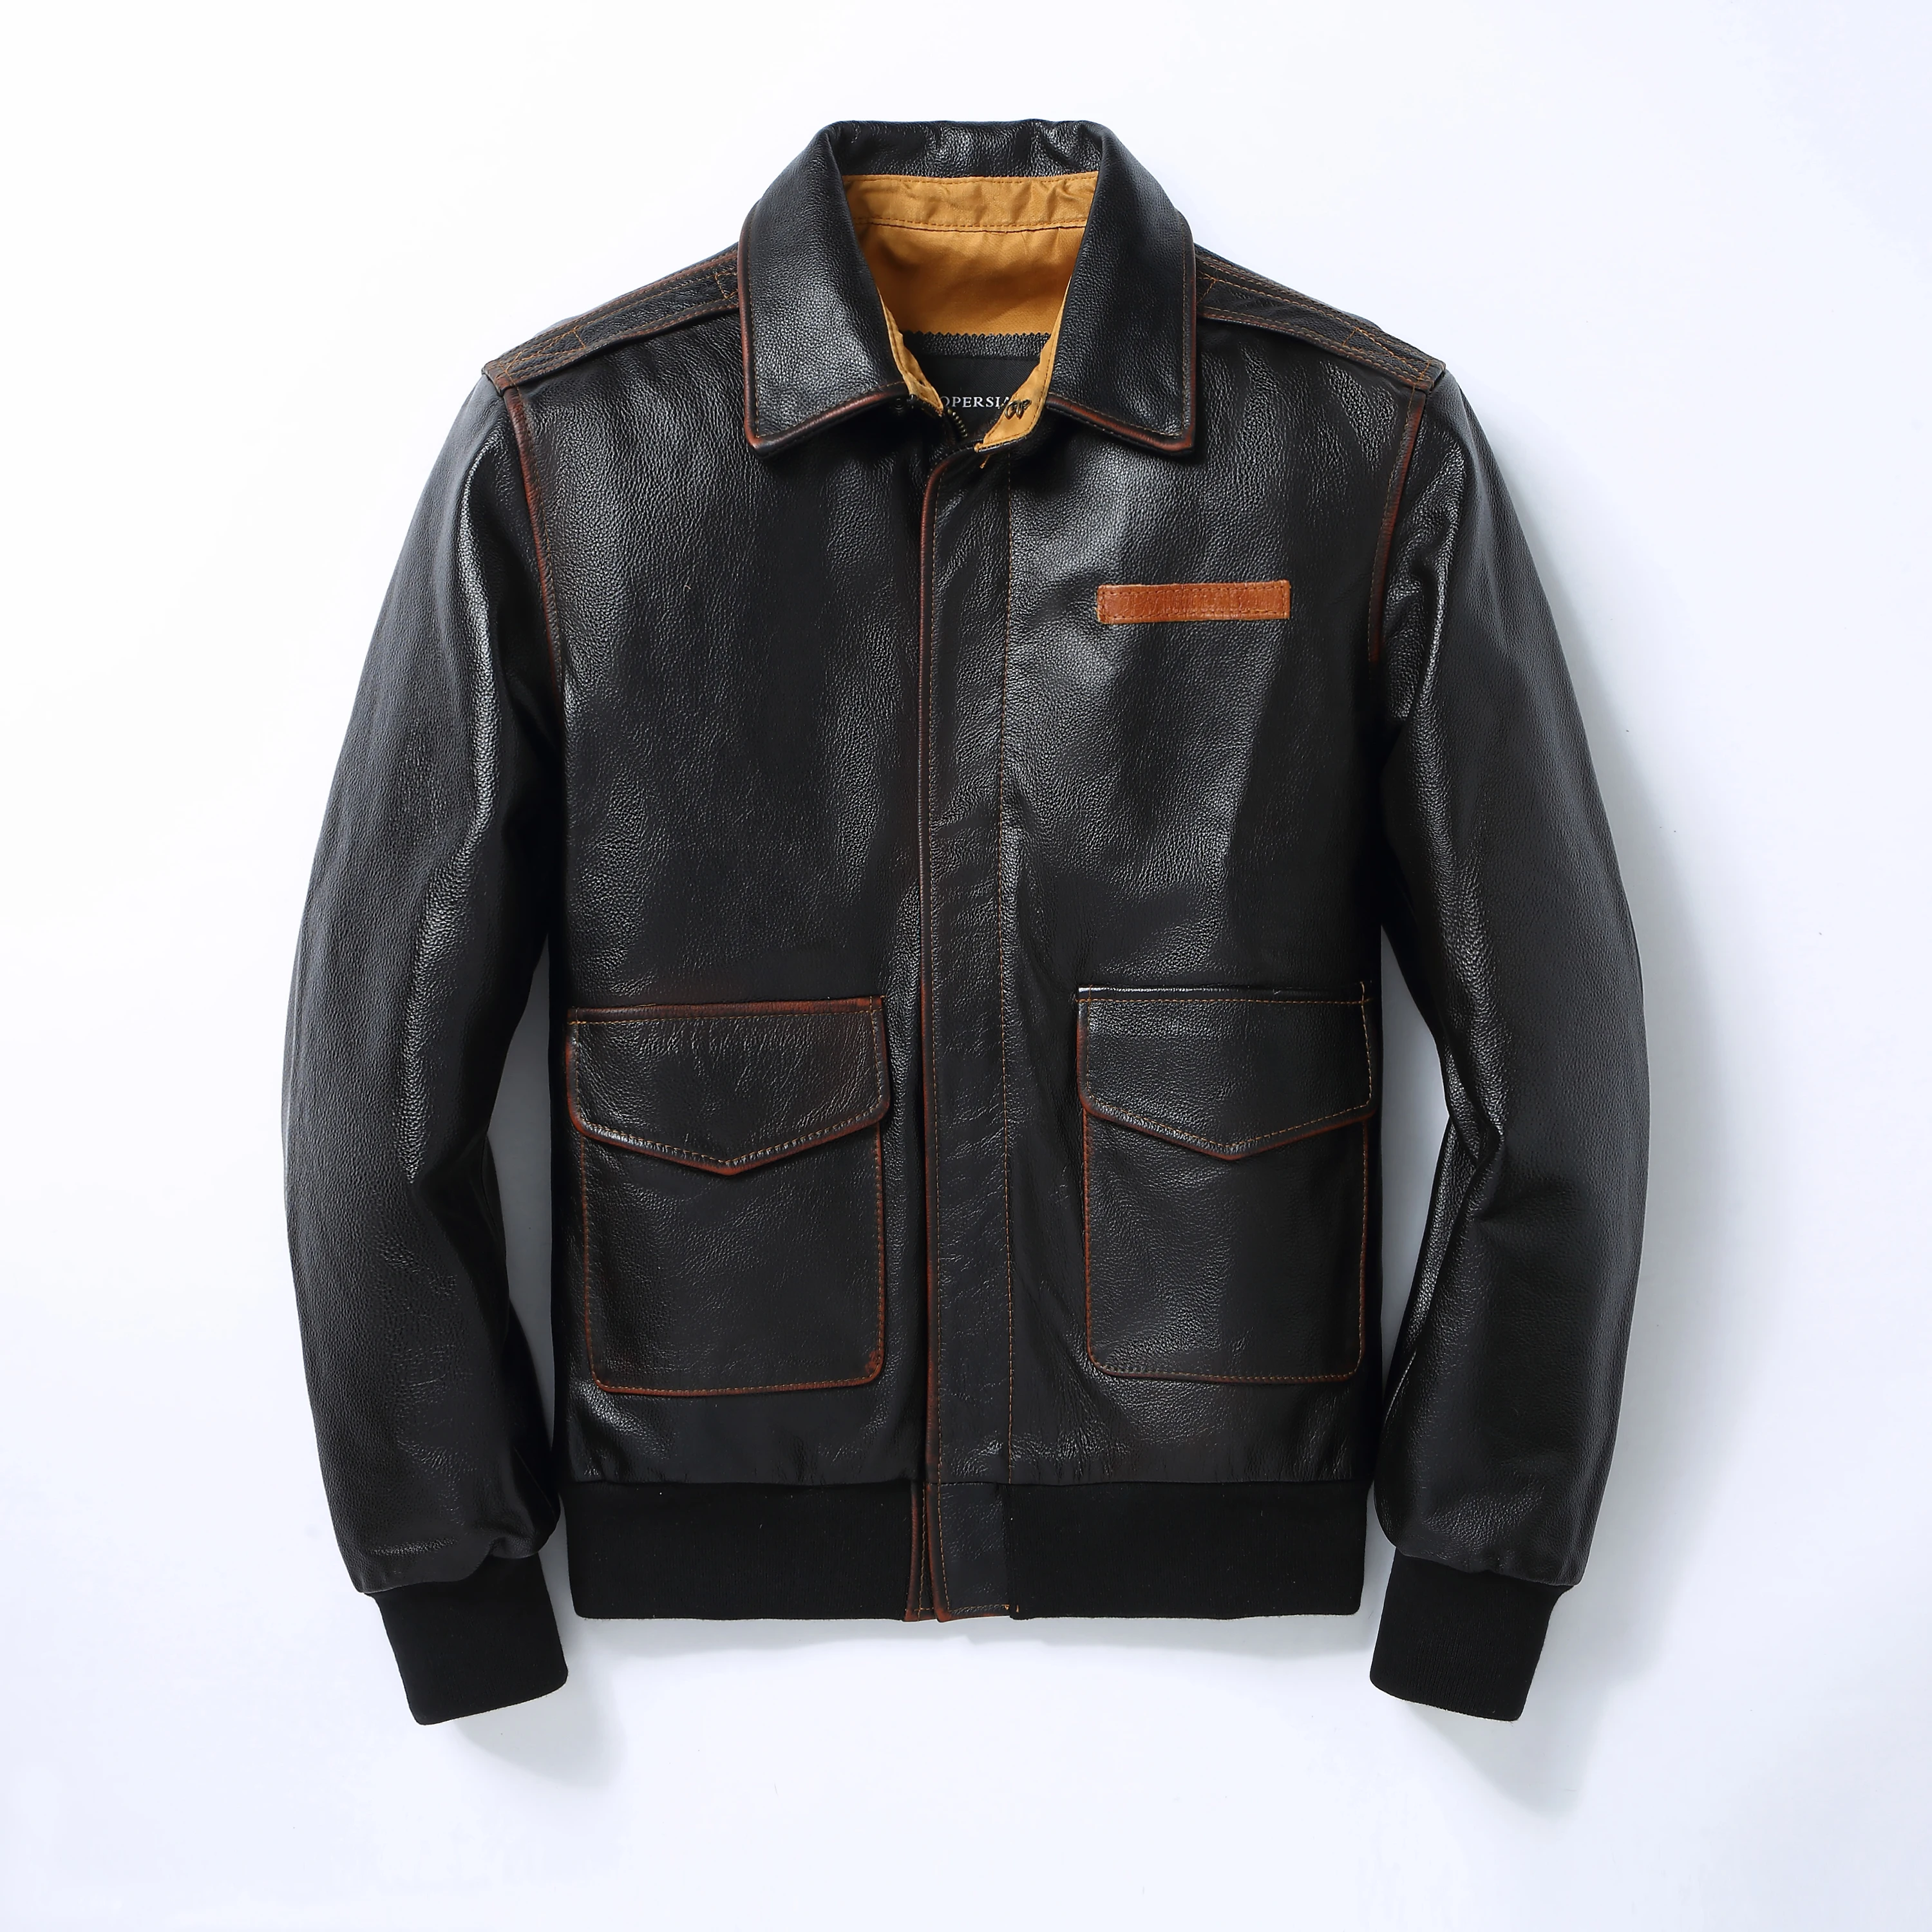 A2 leather jacket men's classic black top layer cowhide baseball jacket fashion natural cowhide winter coat